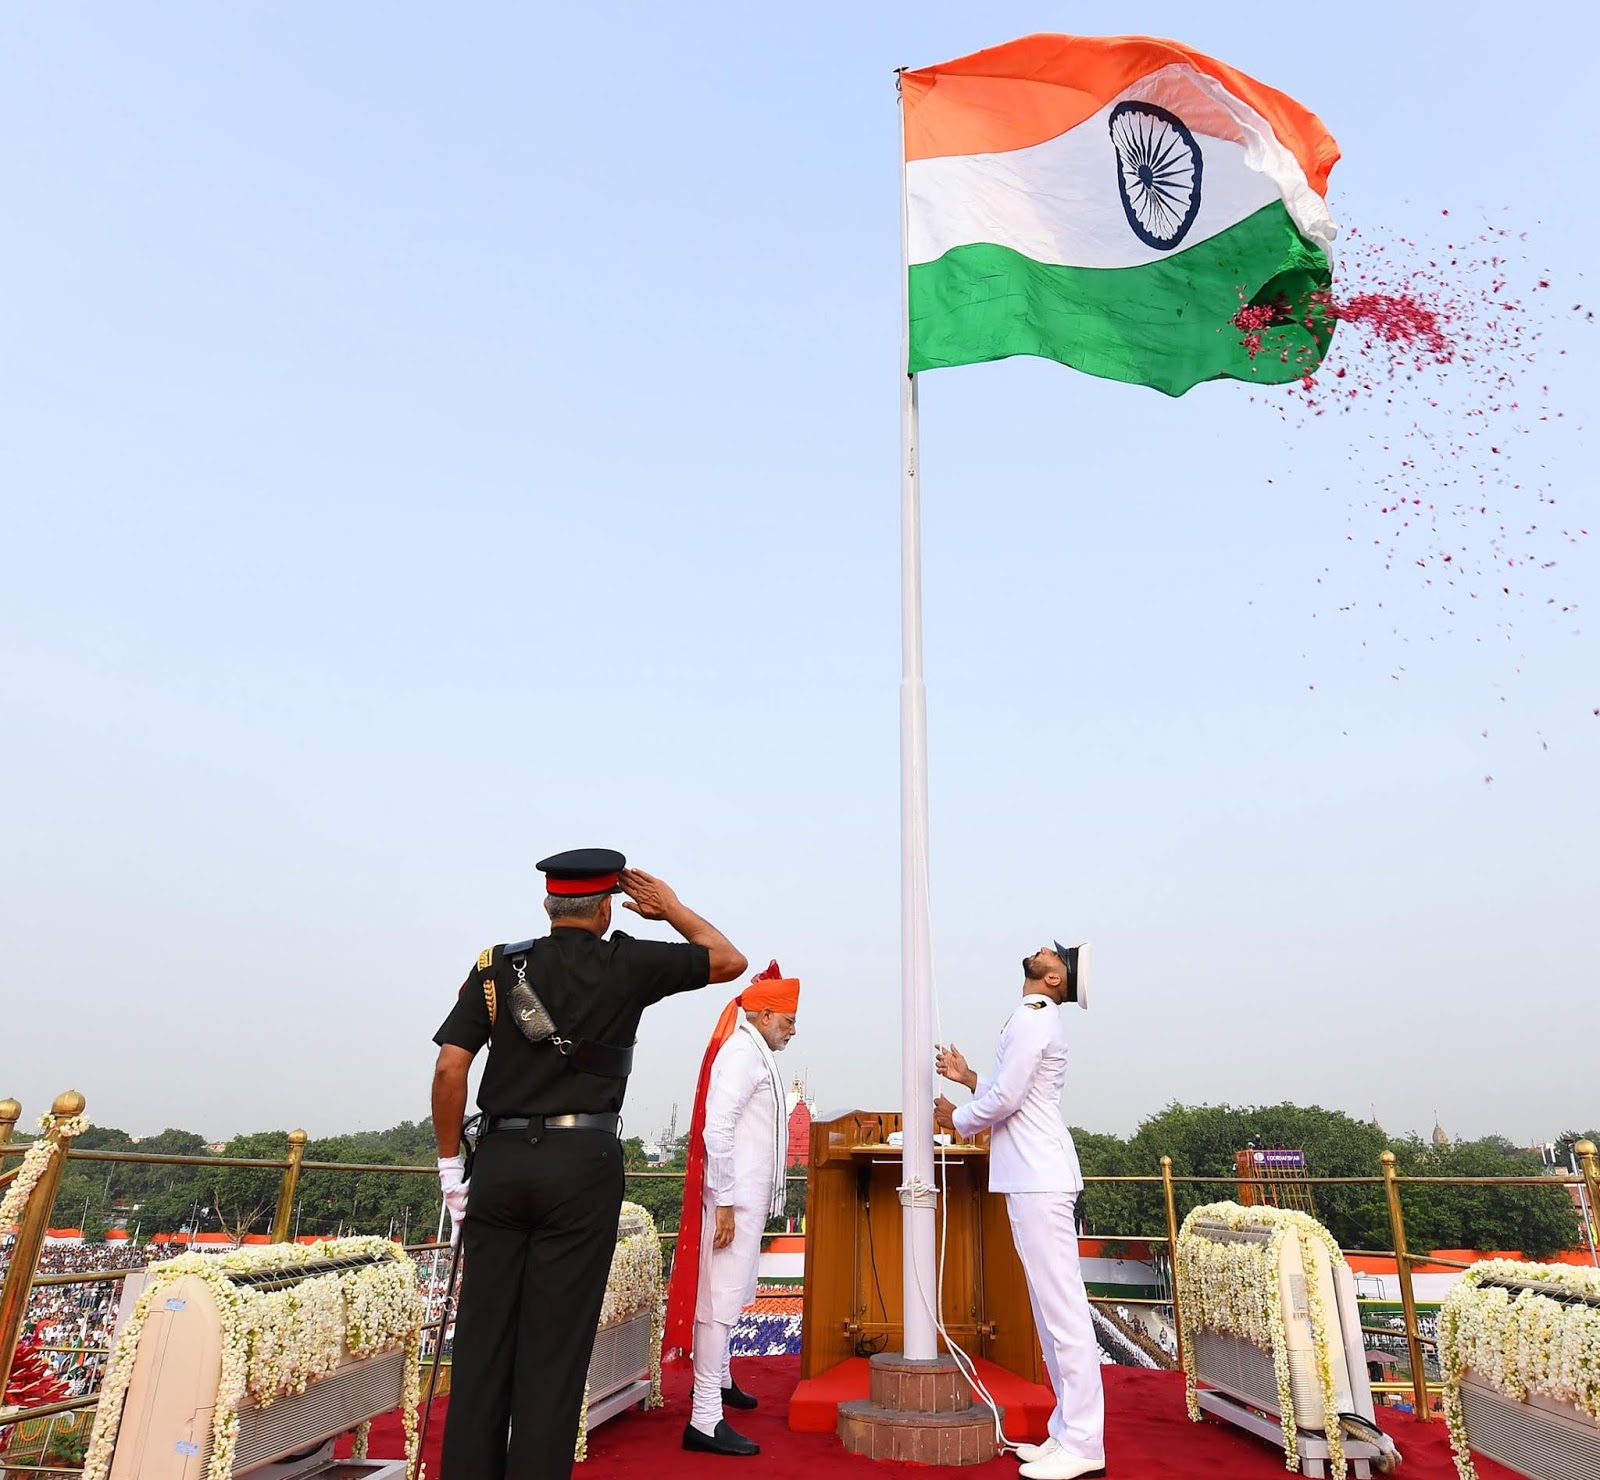 The Prime Minister, Narendra Modi unfurling the Tricolour flag at the ramparts of Red Fort on the occasion of 72nd Independence Day in Delhi on August 15, 2018